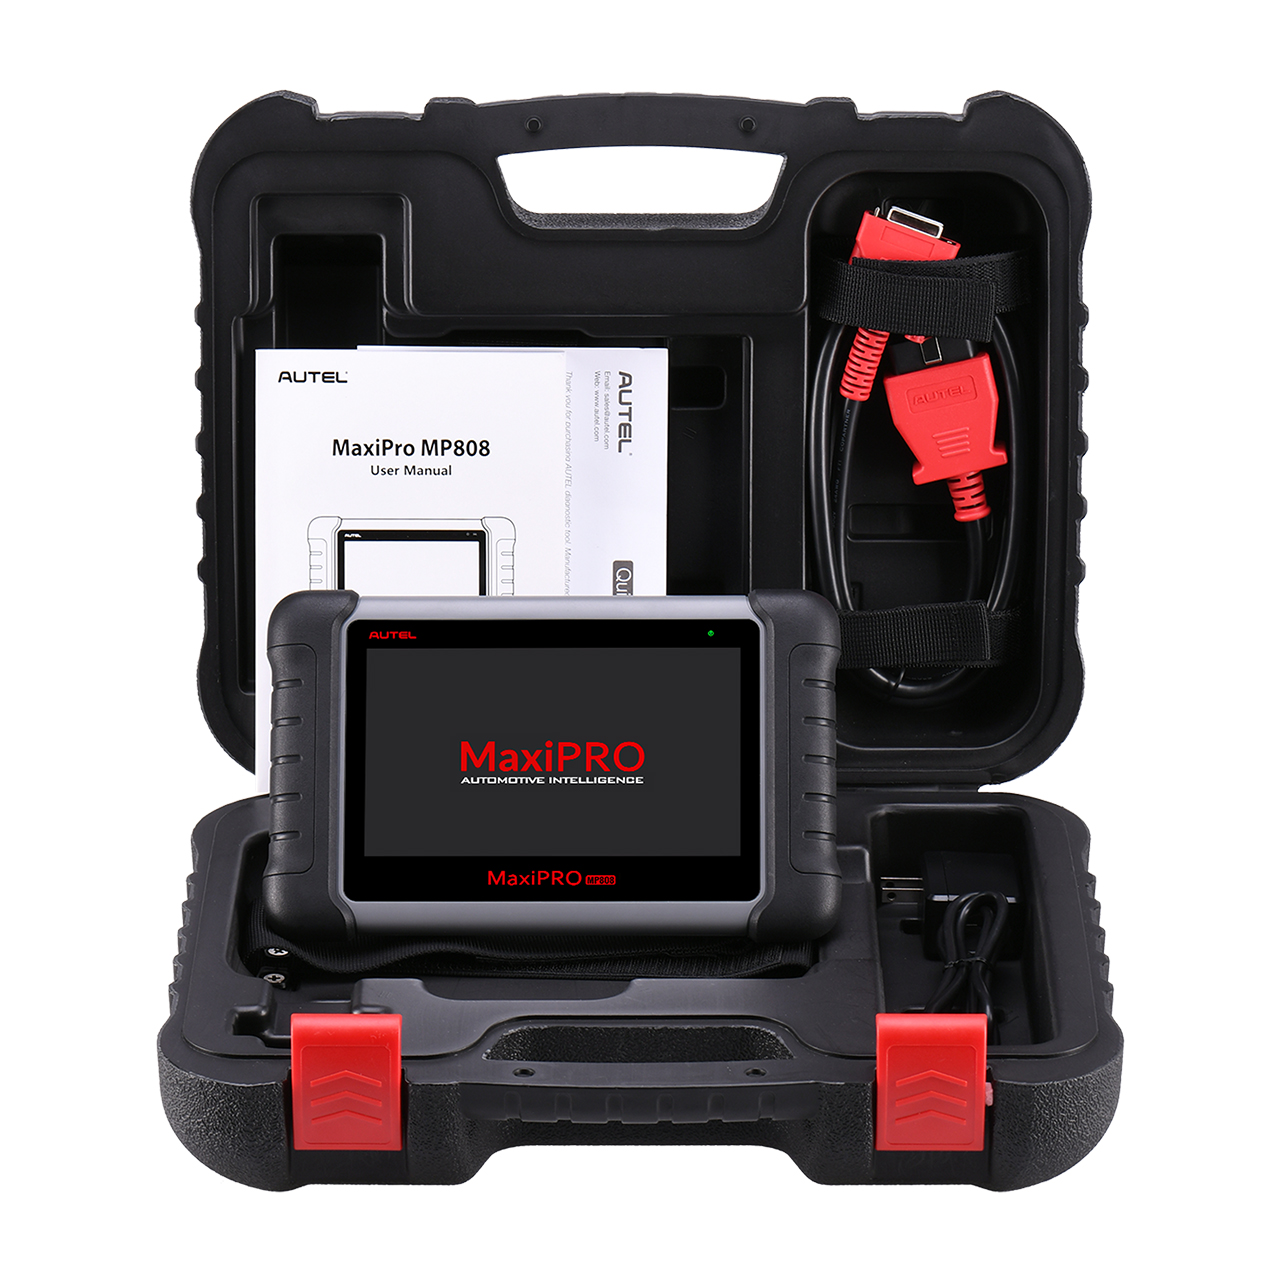 Autel MP808 OBD2 Scanner Car Diagnostic Scan Tool with Bi-directional Control Ability and Key Programming